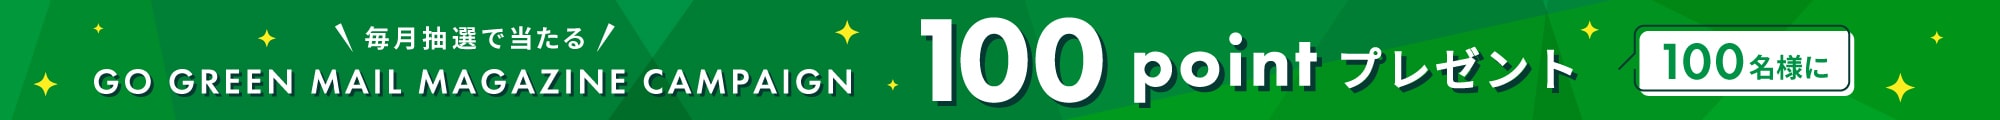 GO GREEN MAIL MAGAZINE CAMPAIGN 100POINT プレゼント